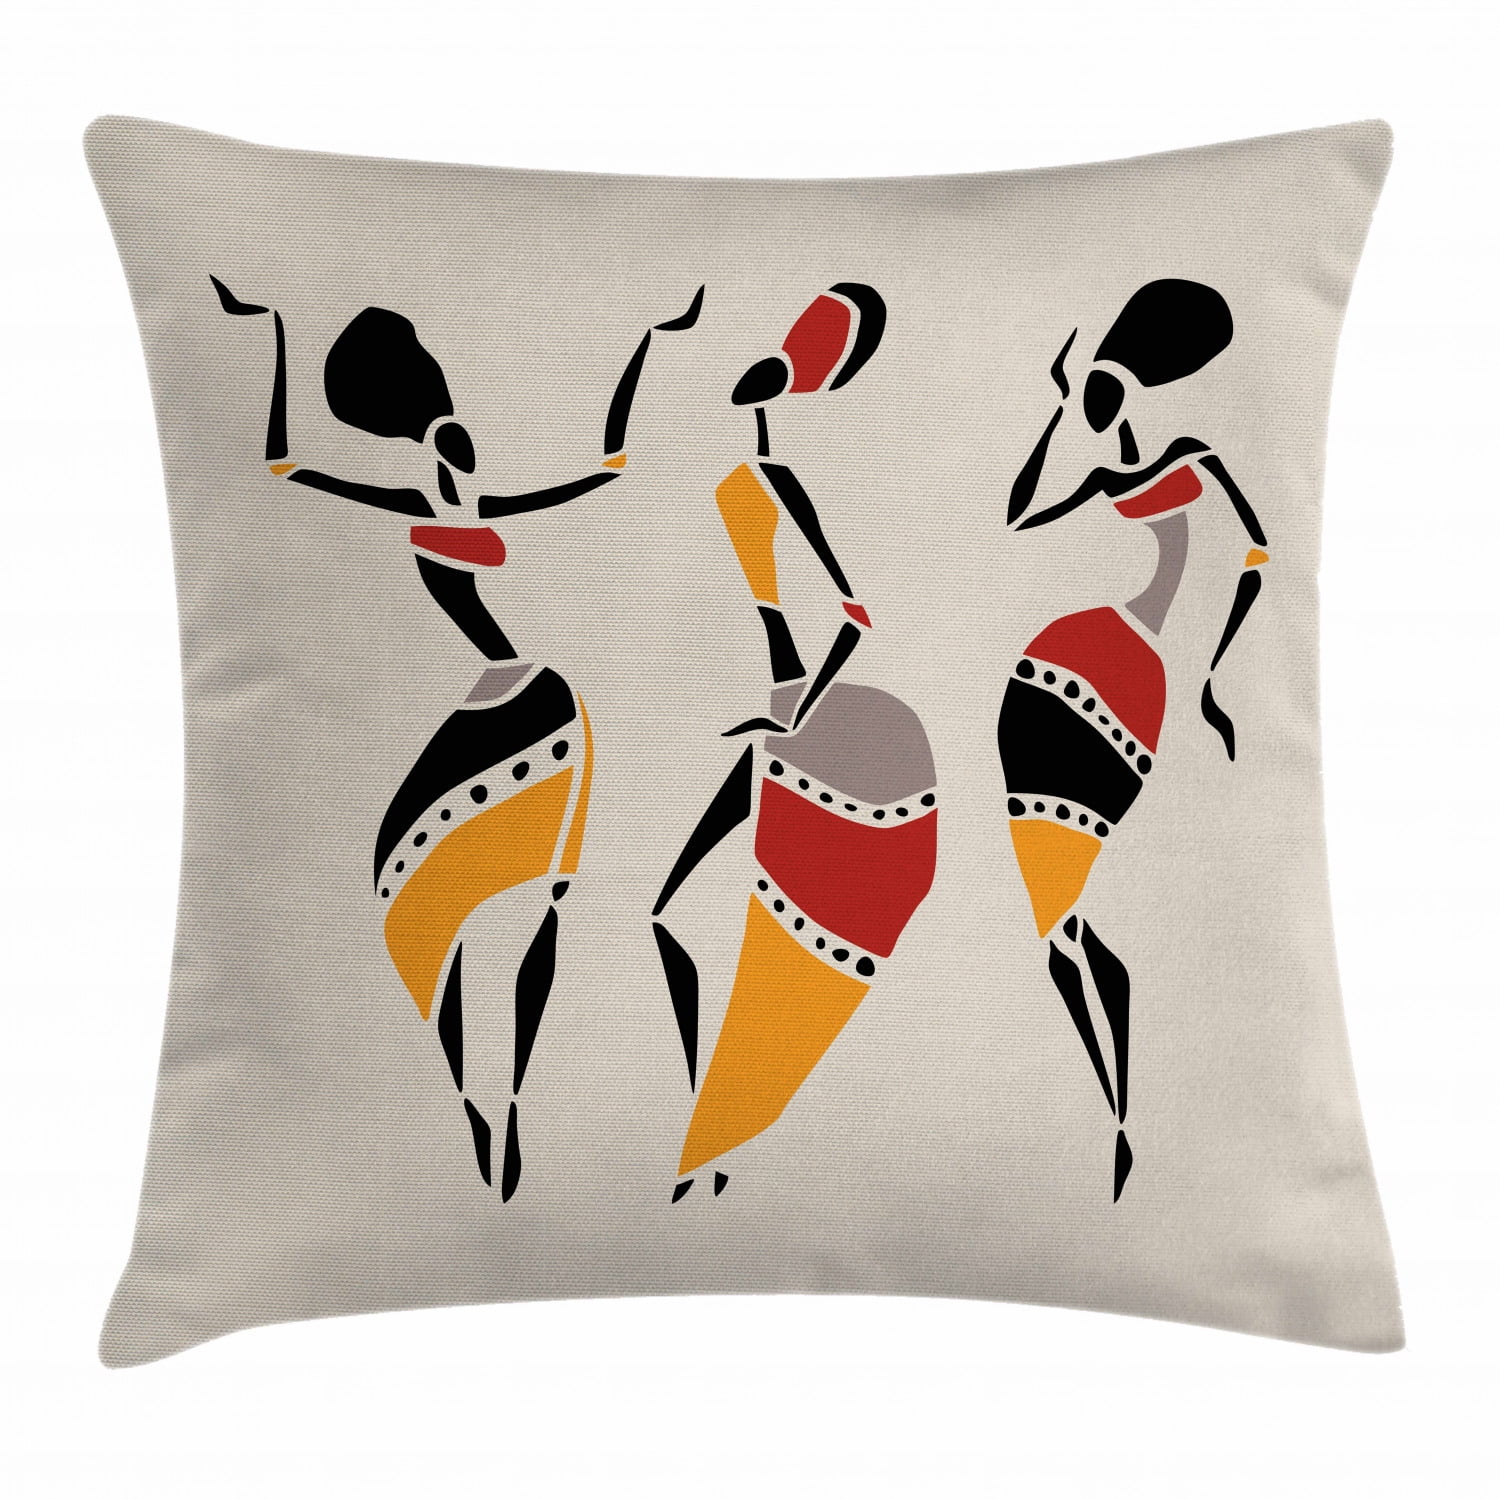 African Woman Hand Embroidered Pillow Cover Female in Nature Cushion Cover Desert Illustration Pillowcase Ethnic Home Decor Gift